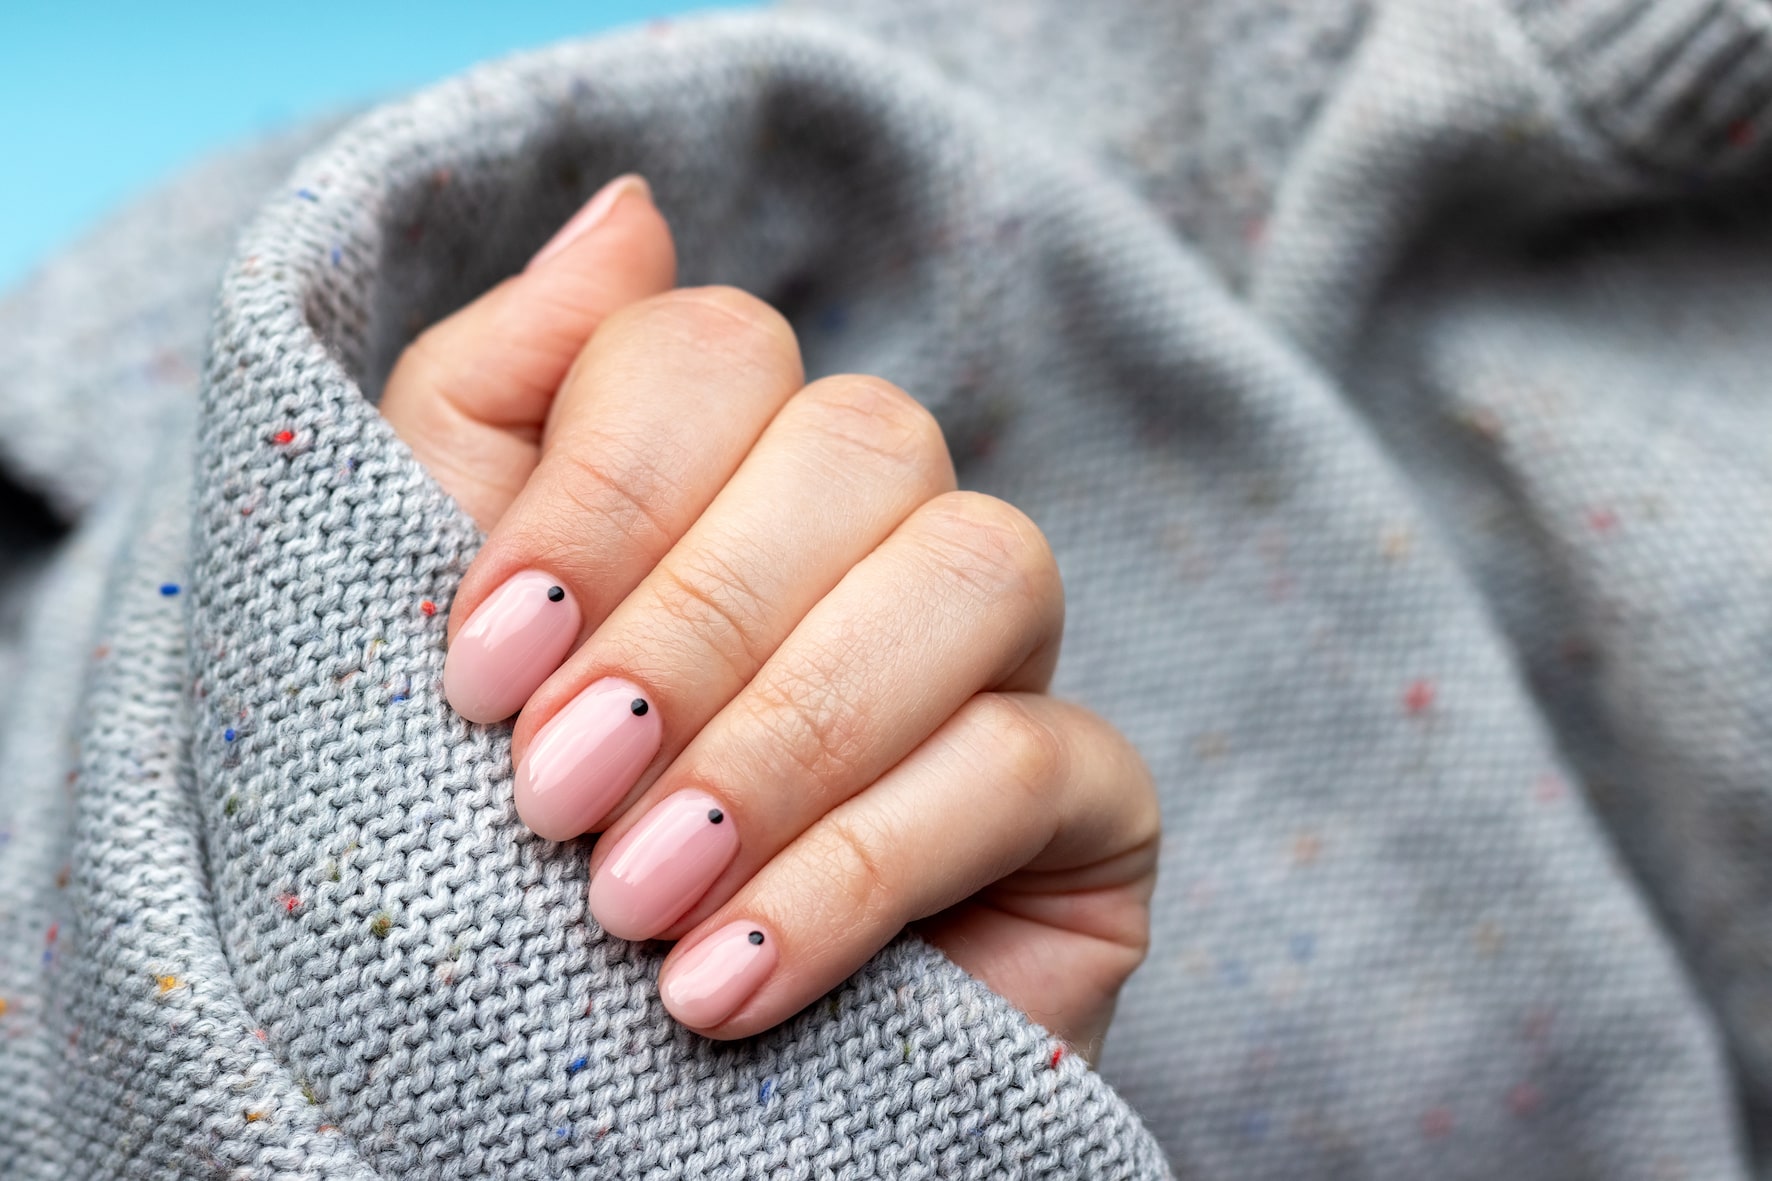 Definition and Advantages of Nail Extension